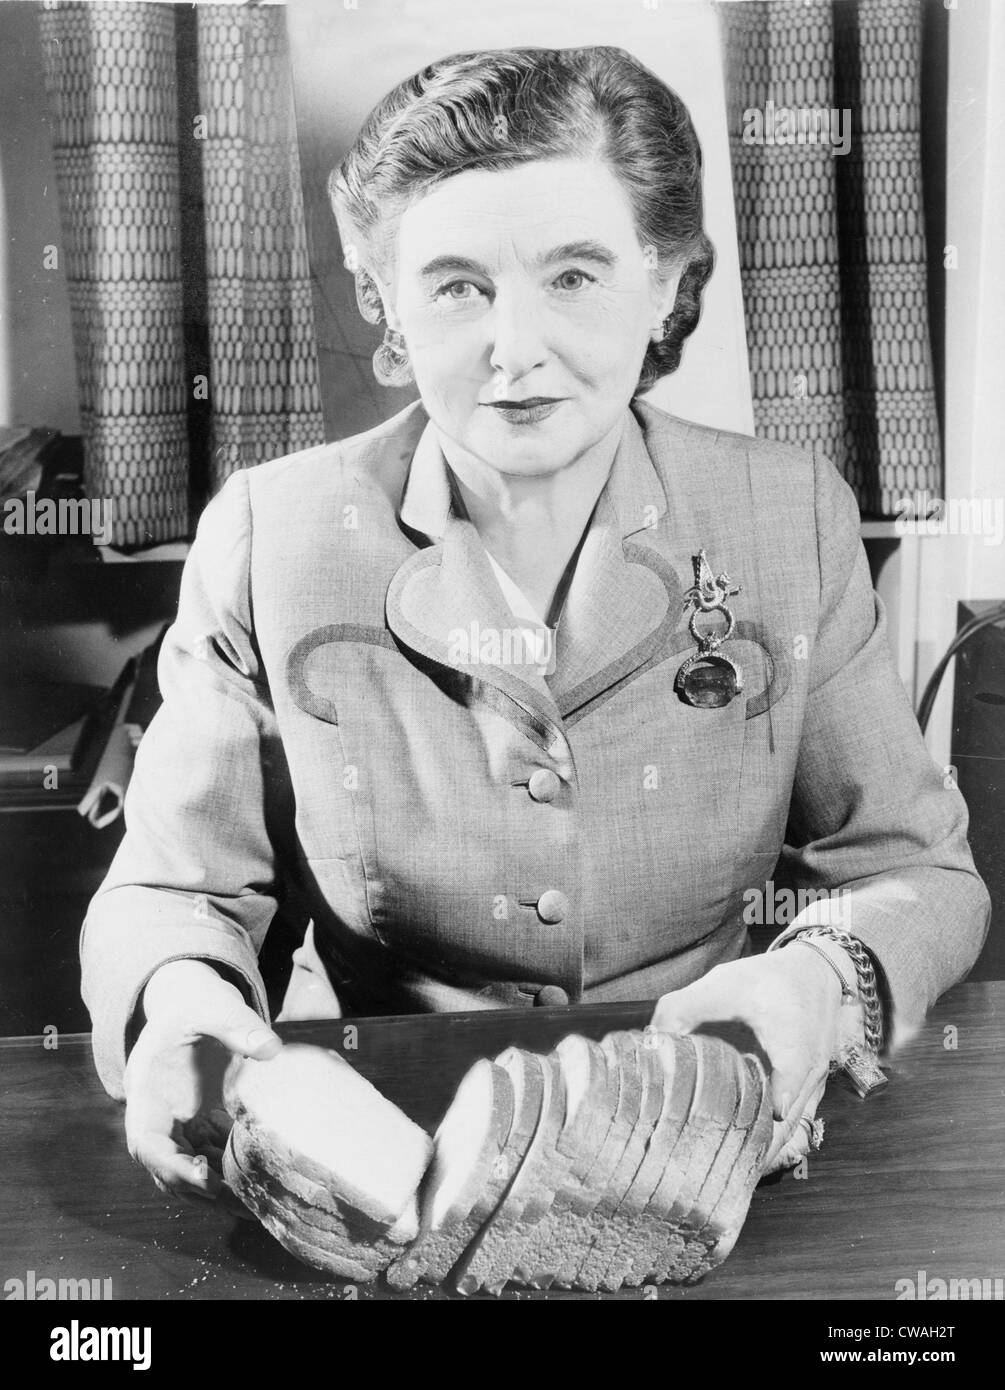 Margaret Rudkin (1897-1967) was the founder of the Pepperidge Farm brand. She named her bakery business after her home in Stock Photo